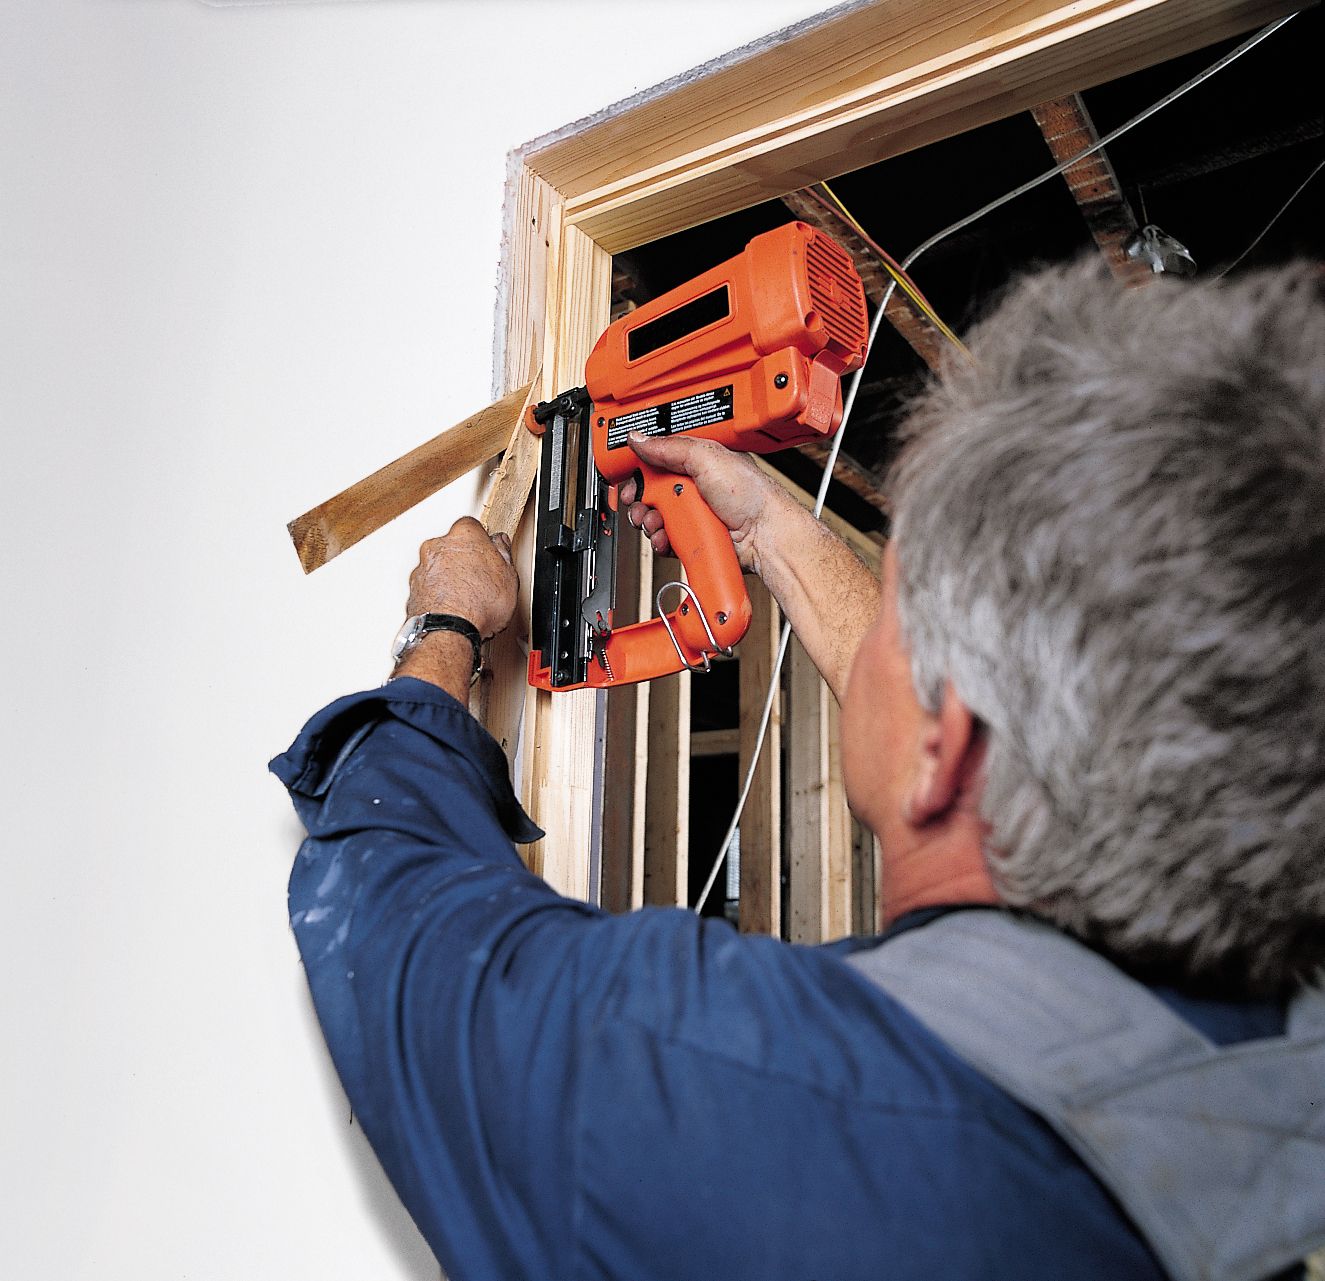 Prehung Interior Doors: Installation in 8 Steps - This Old House